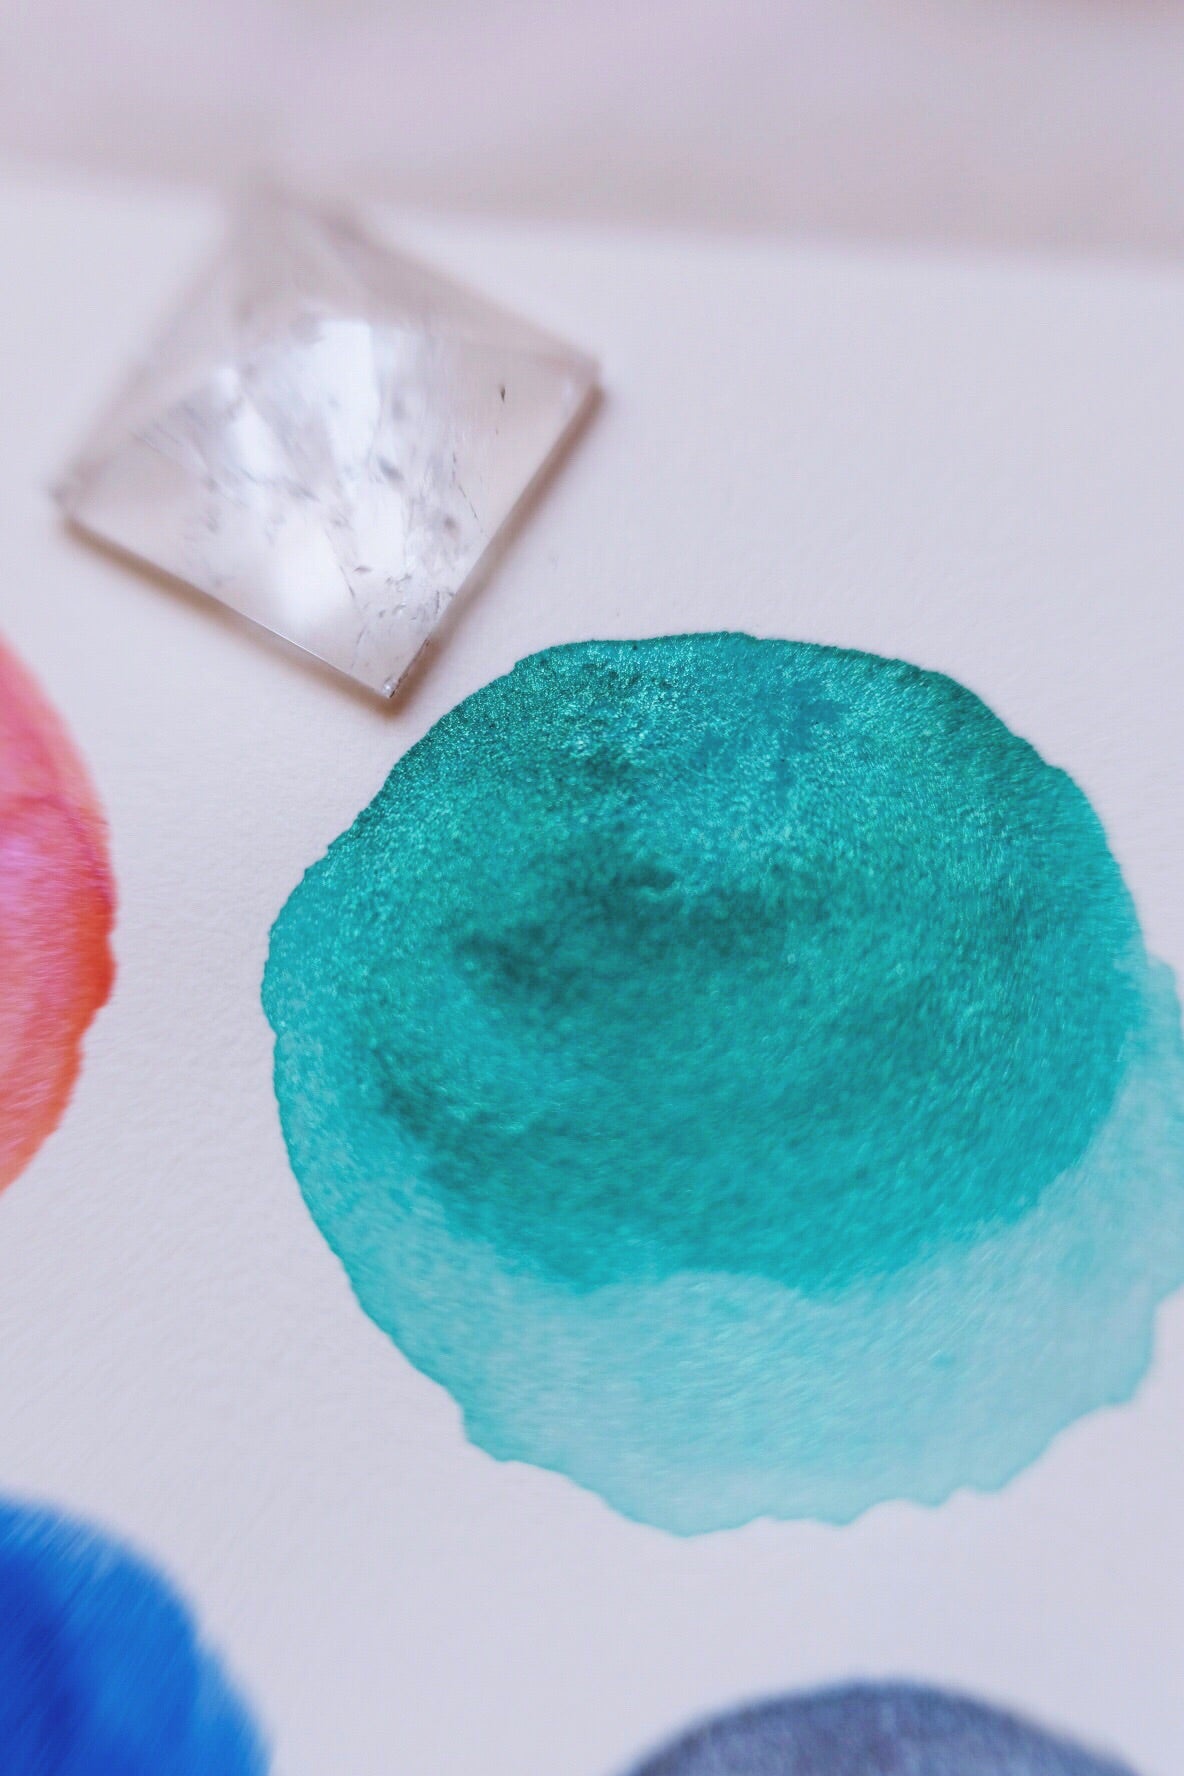 RESERVE for Melodee + Moons of Saturn + Limited Edition Mineral shimmer watercolor palette